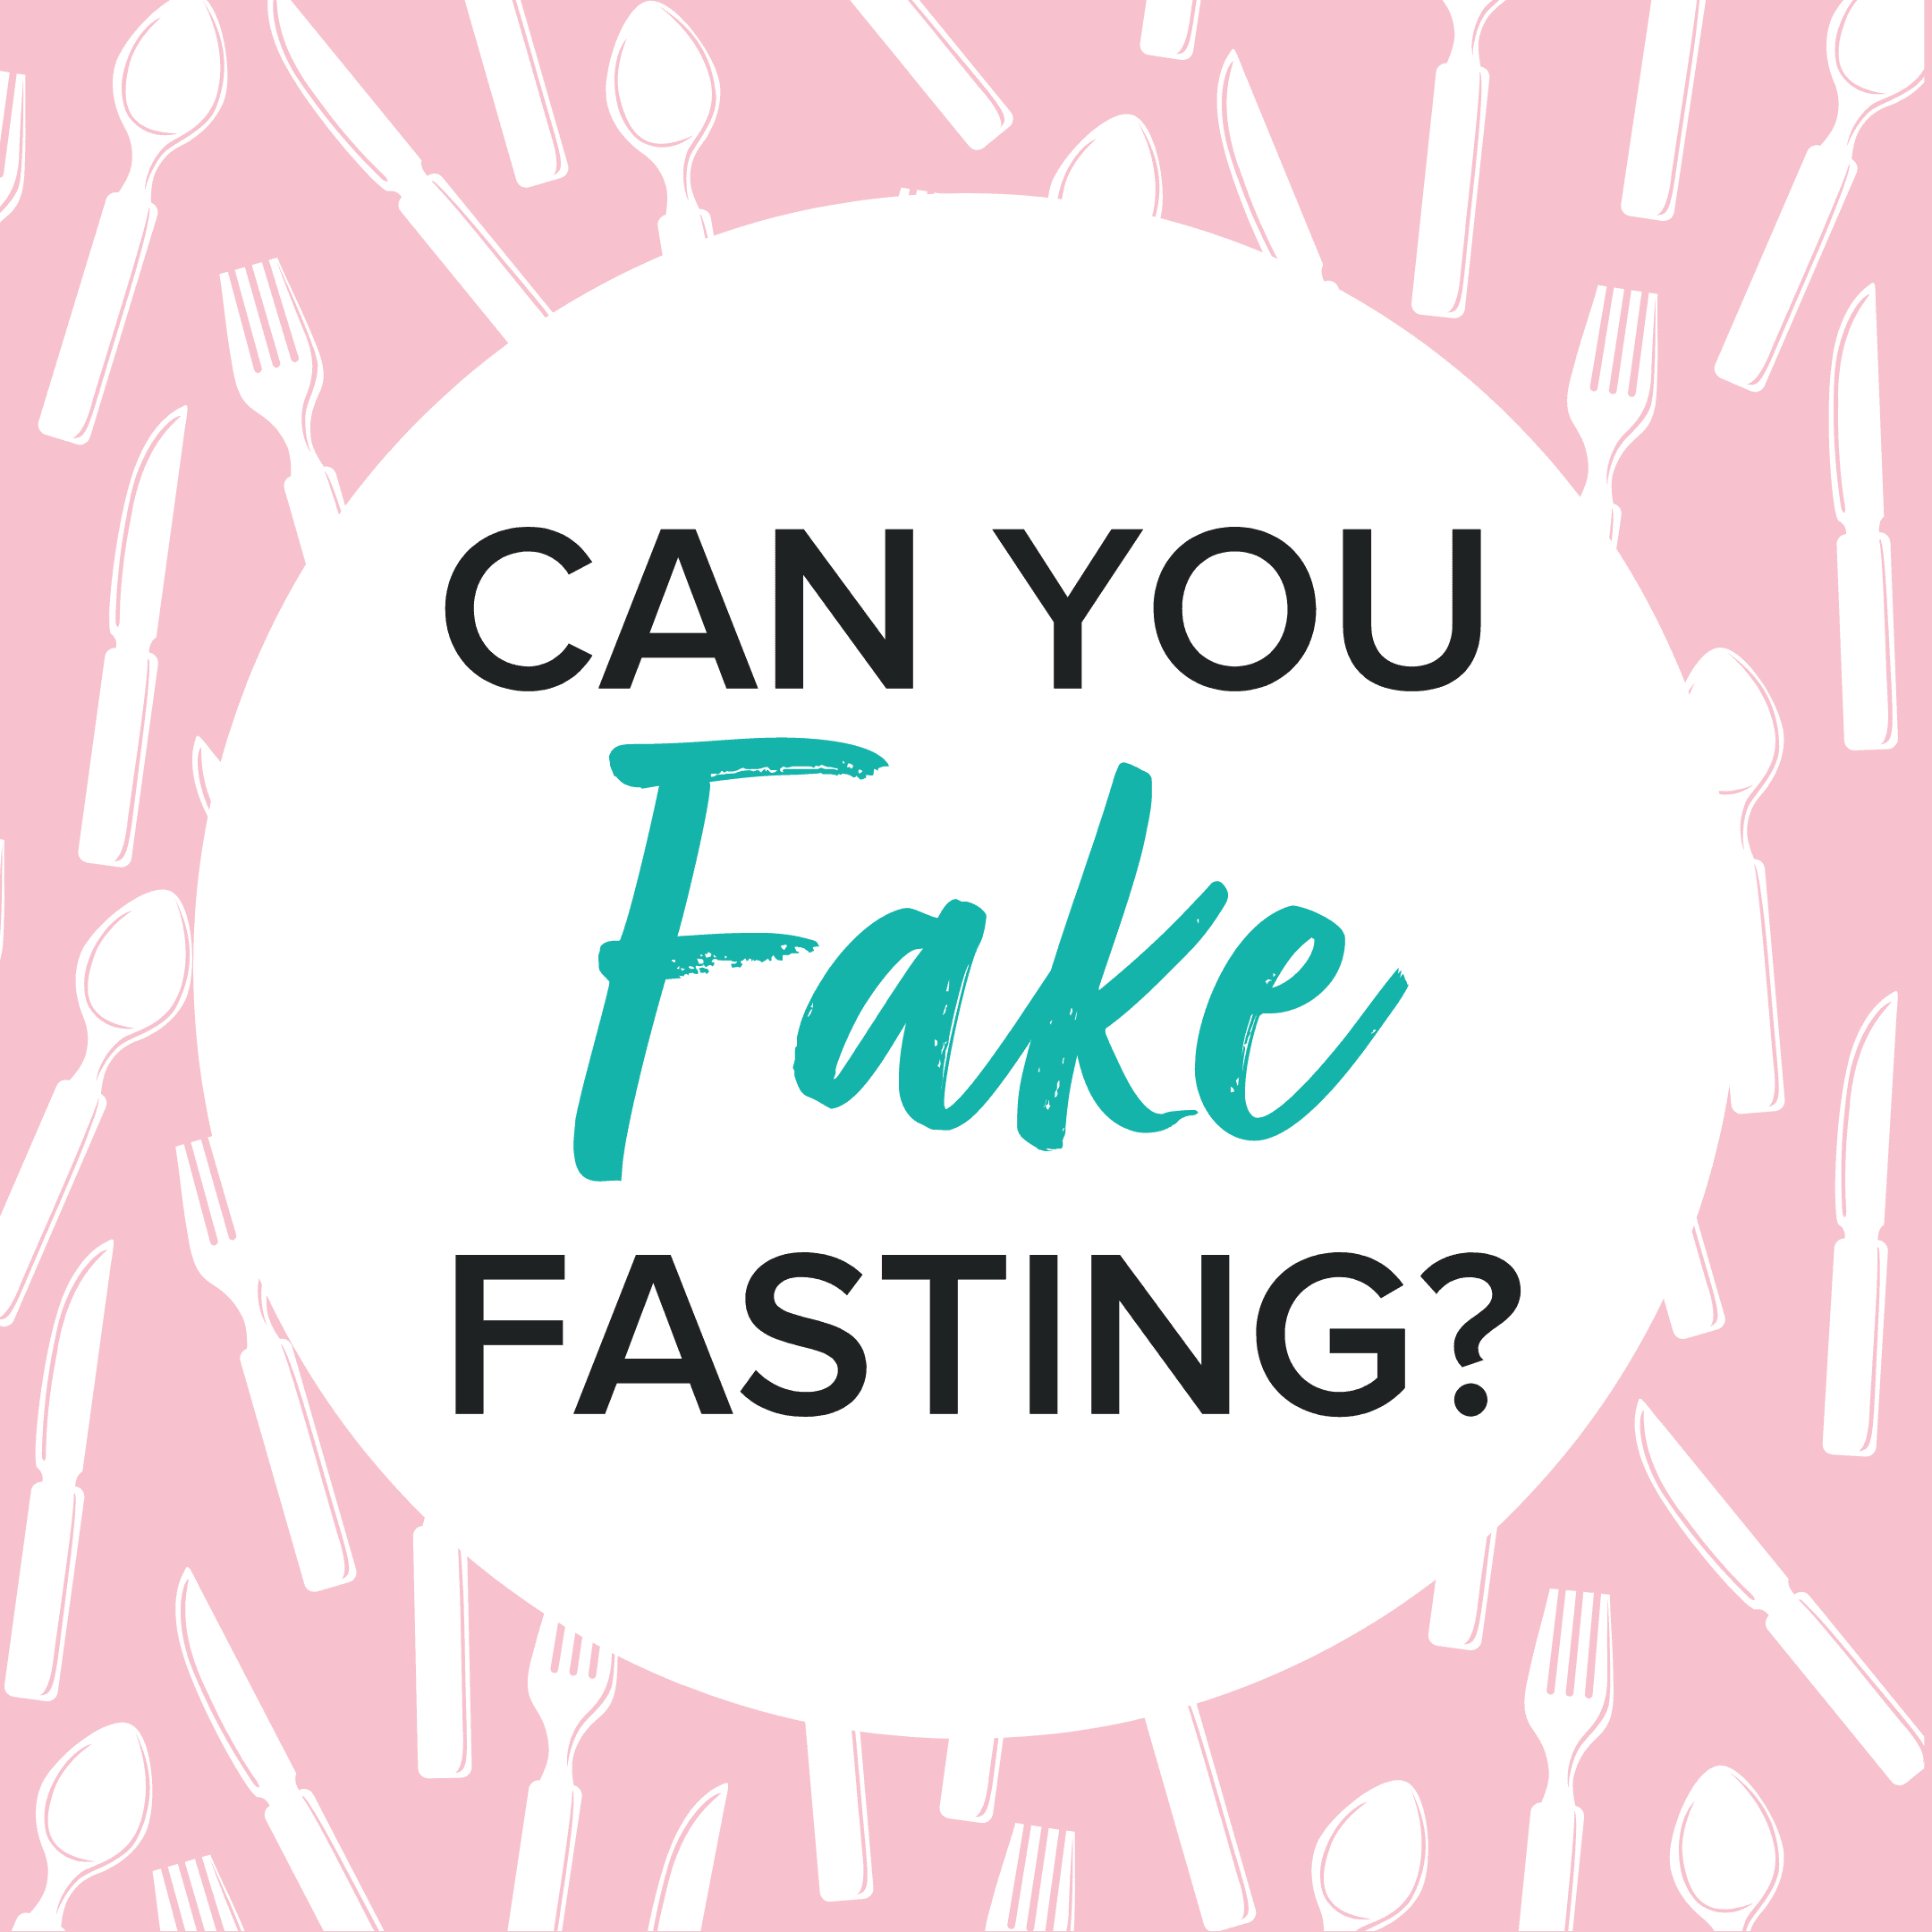 text that reads" Can you Fake Fasting?" placed in a circle surrounded by drawings of spoons, forks and knives